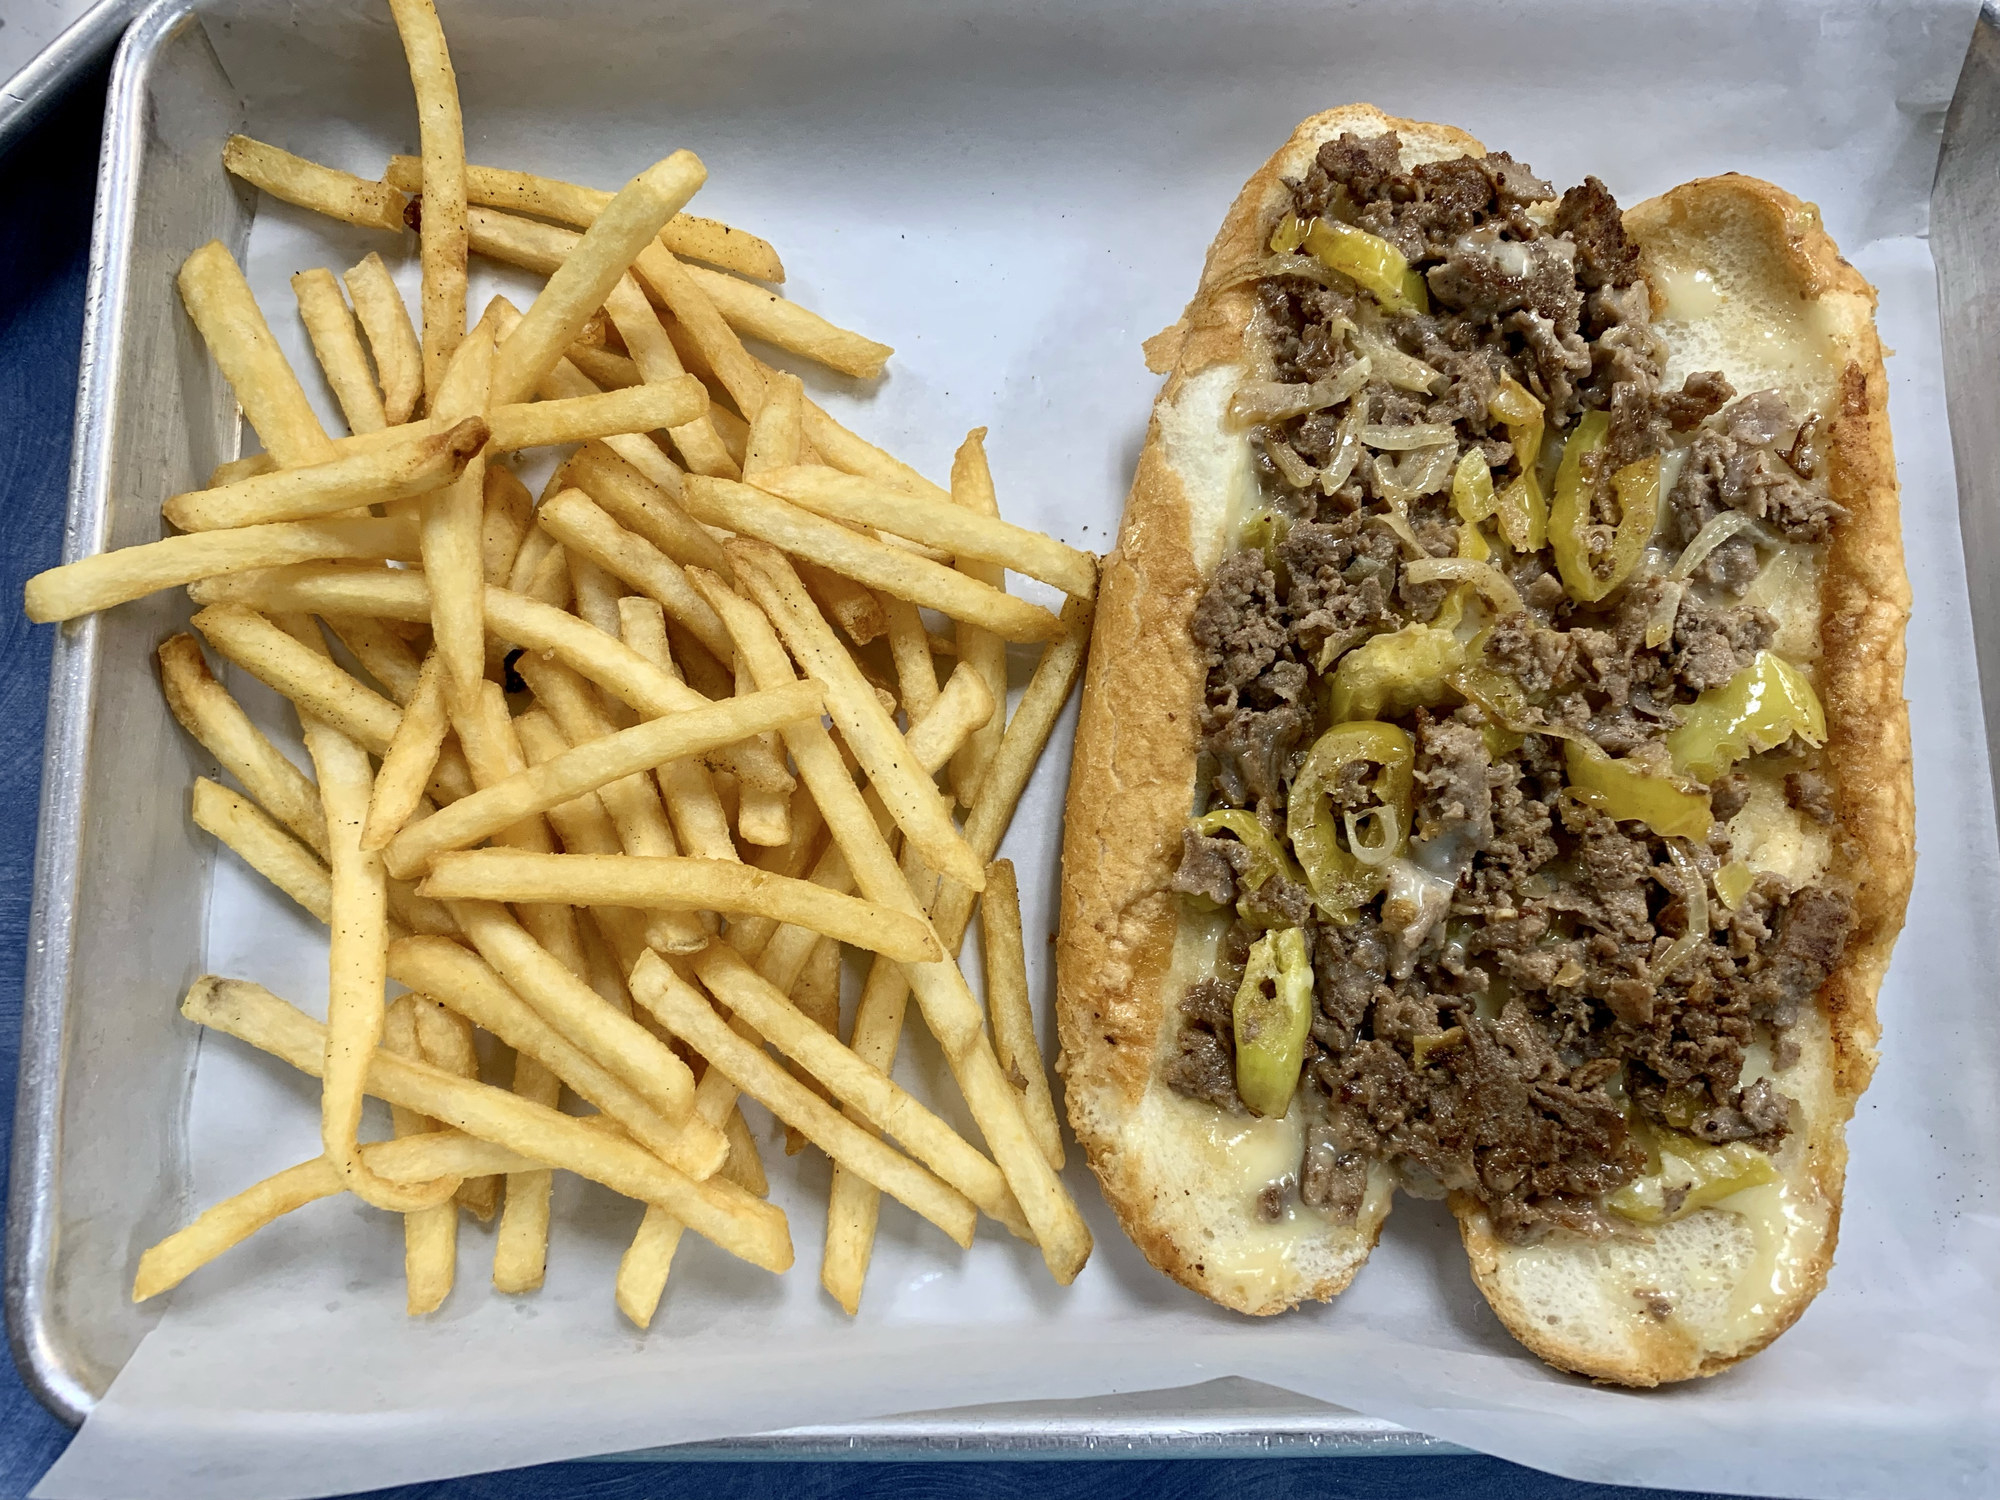 A Philly cheesesteak and fries